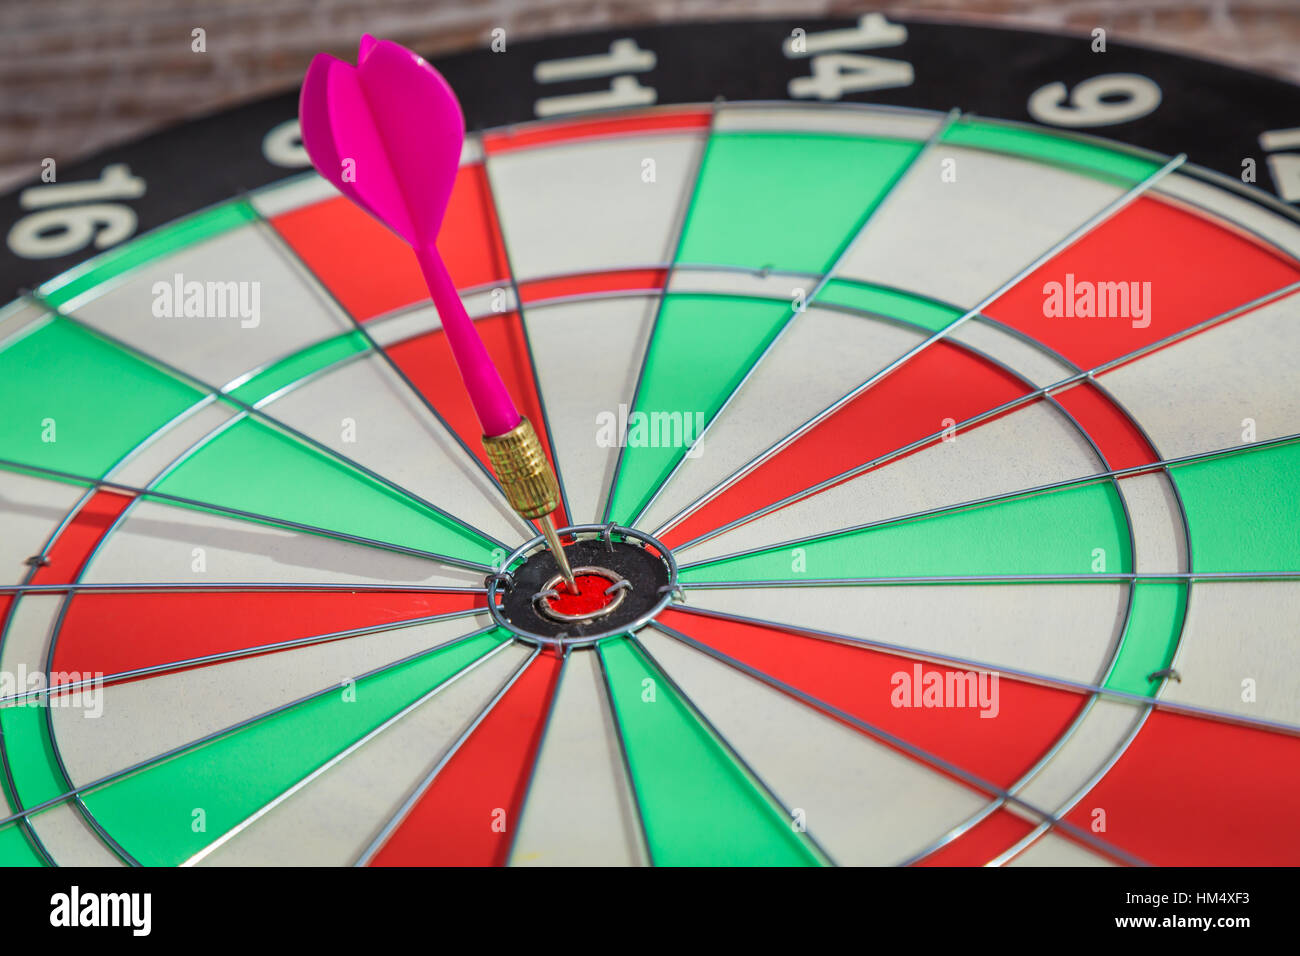 Page 2 - Dartboard Texture High Resolution Stock Photography and Images -  Alamy